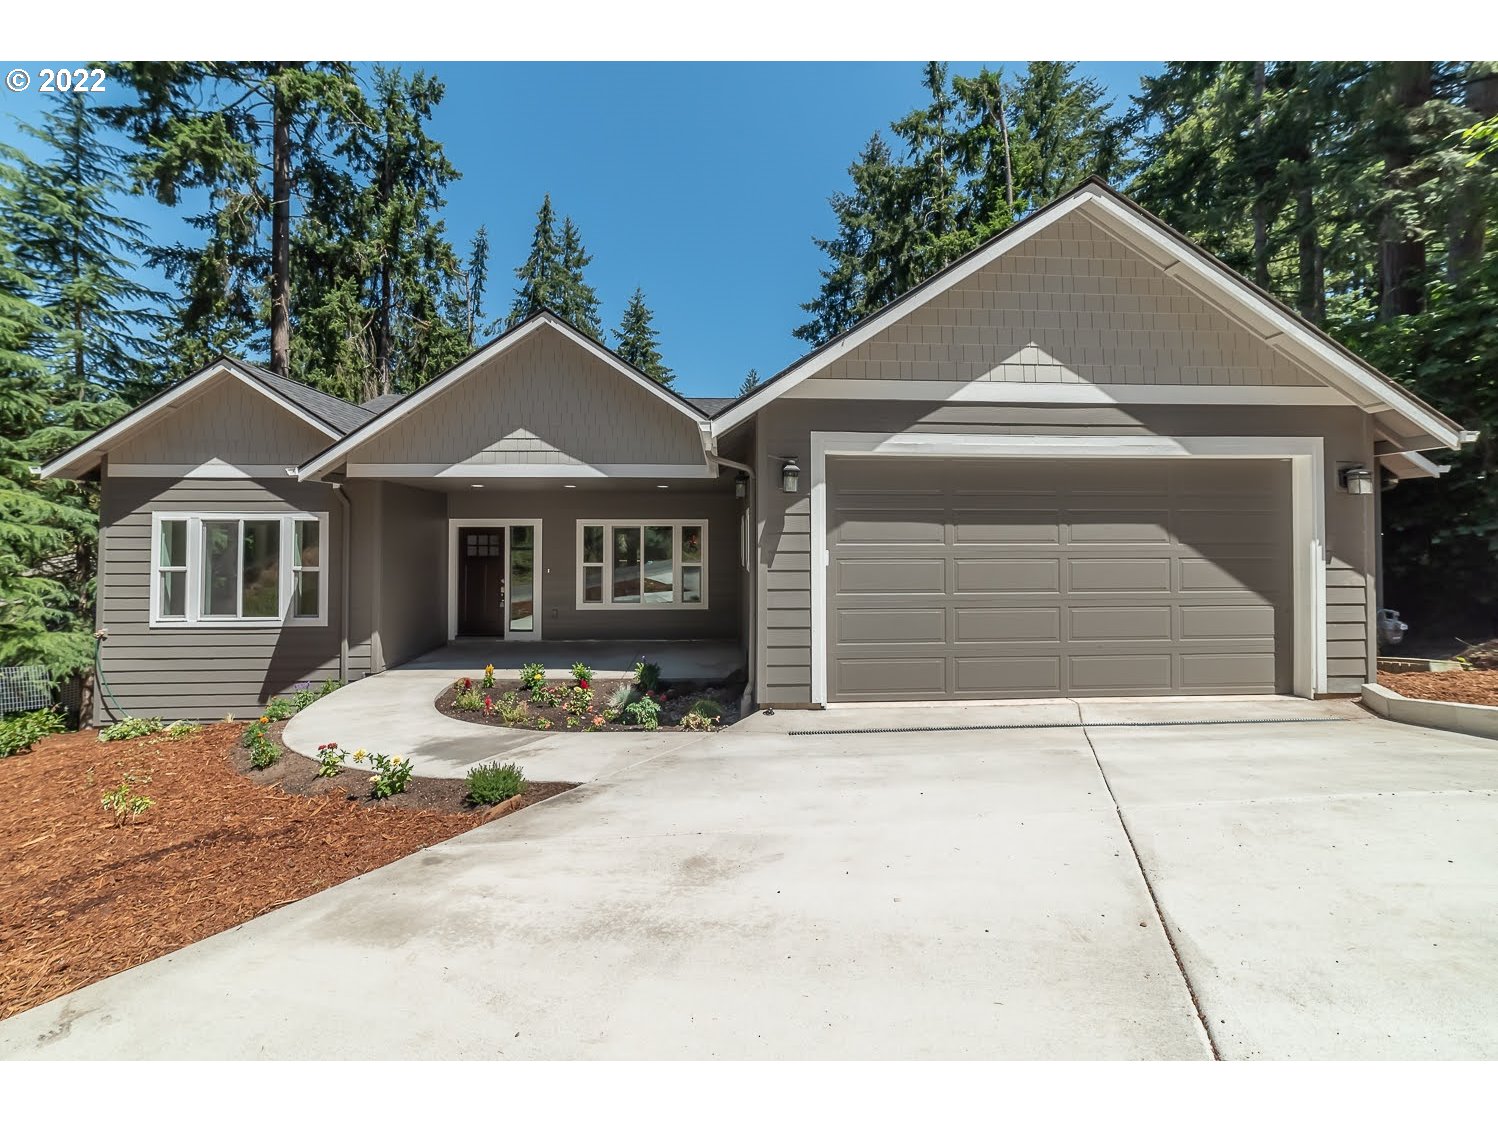 Stunning new construction in SW Eugene, built by Willie Nice Homes! Open concept living & dining w/ deck access & gourmet kitchen. Luxurious primary ensuite boasts soaking tub & large walk-in closet. Main level also features guest bedroom, office w/ closet, full bath & laundry room off the oversized garage. Lower level includes a large family room w/ wet bar, secondary suite, additional 2 beds/1.5 baths, 2 bonus rooms & access to shaded lower deck. This home has it all!